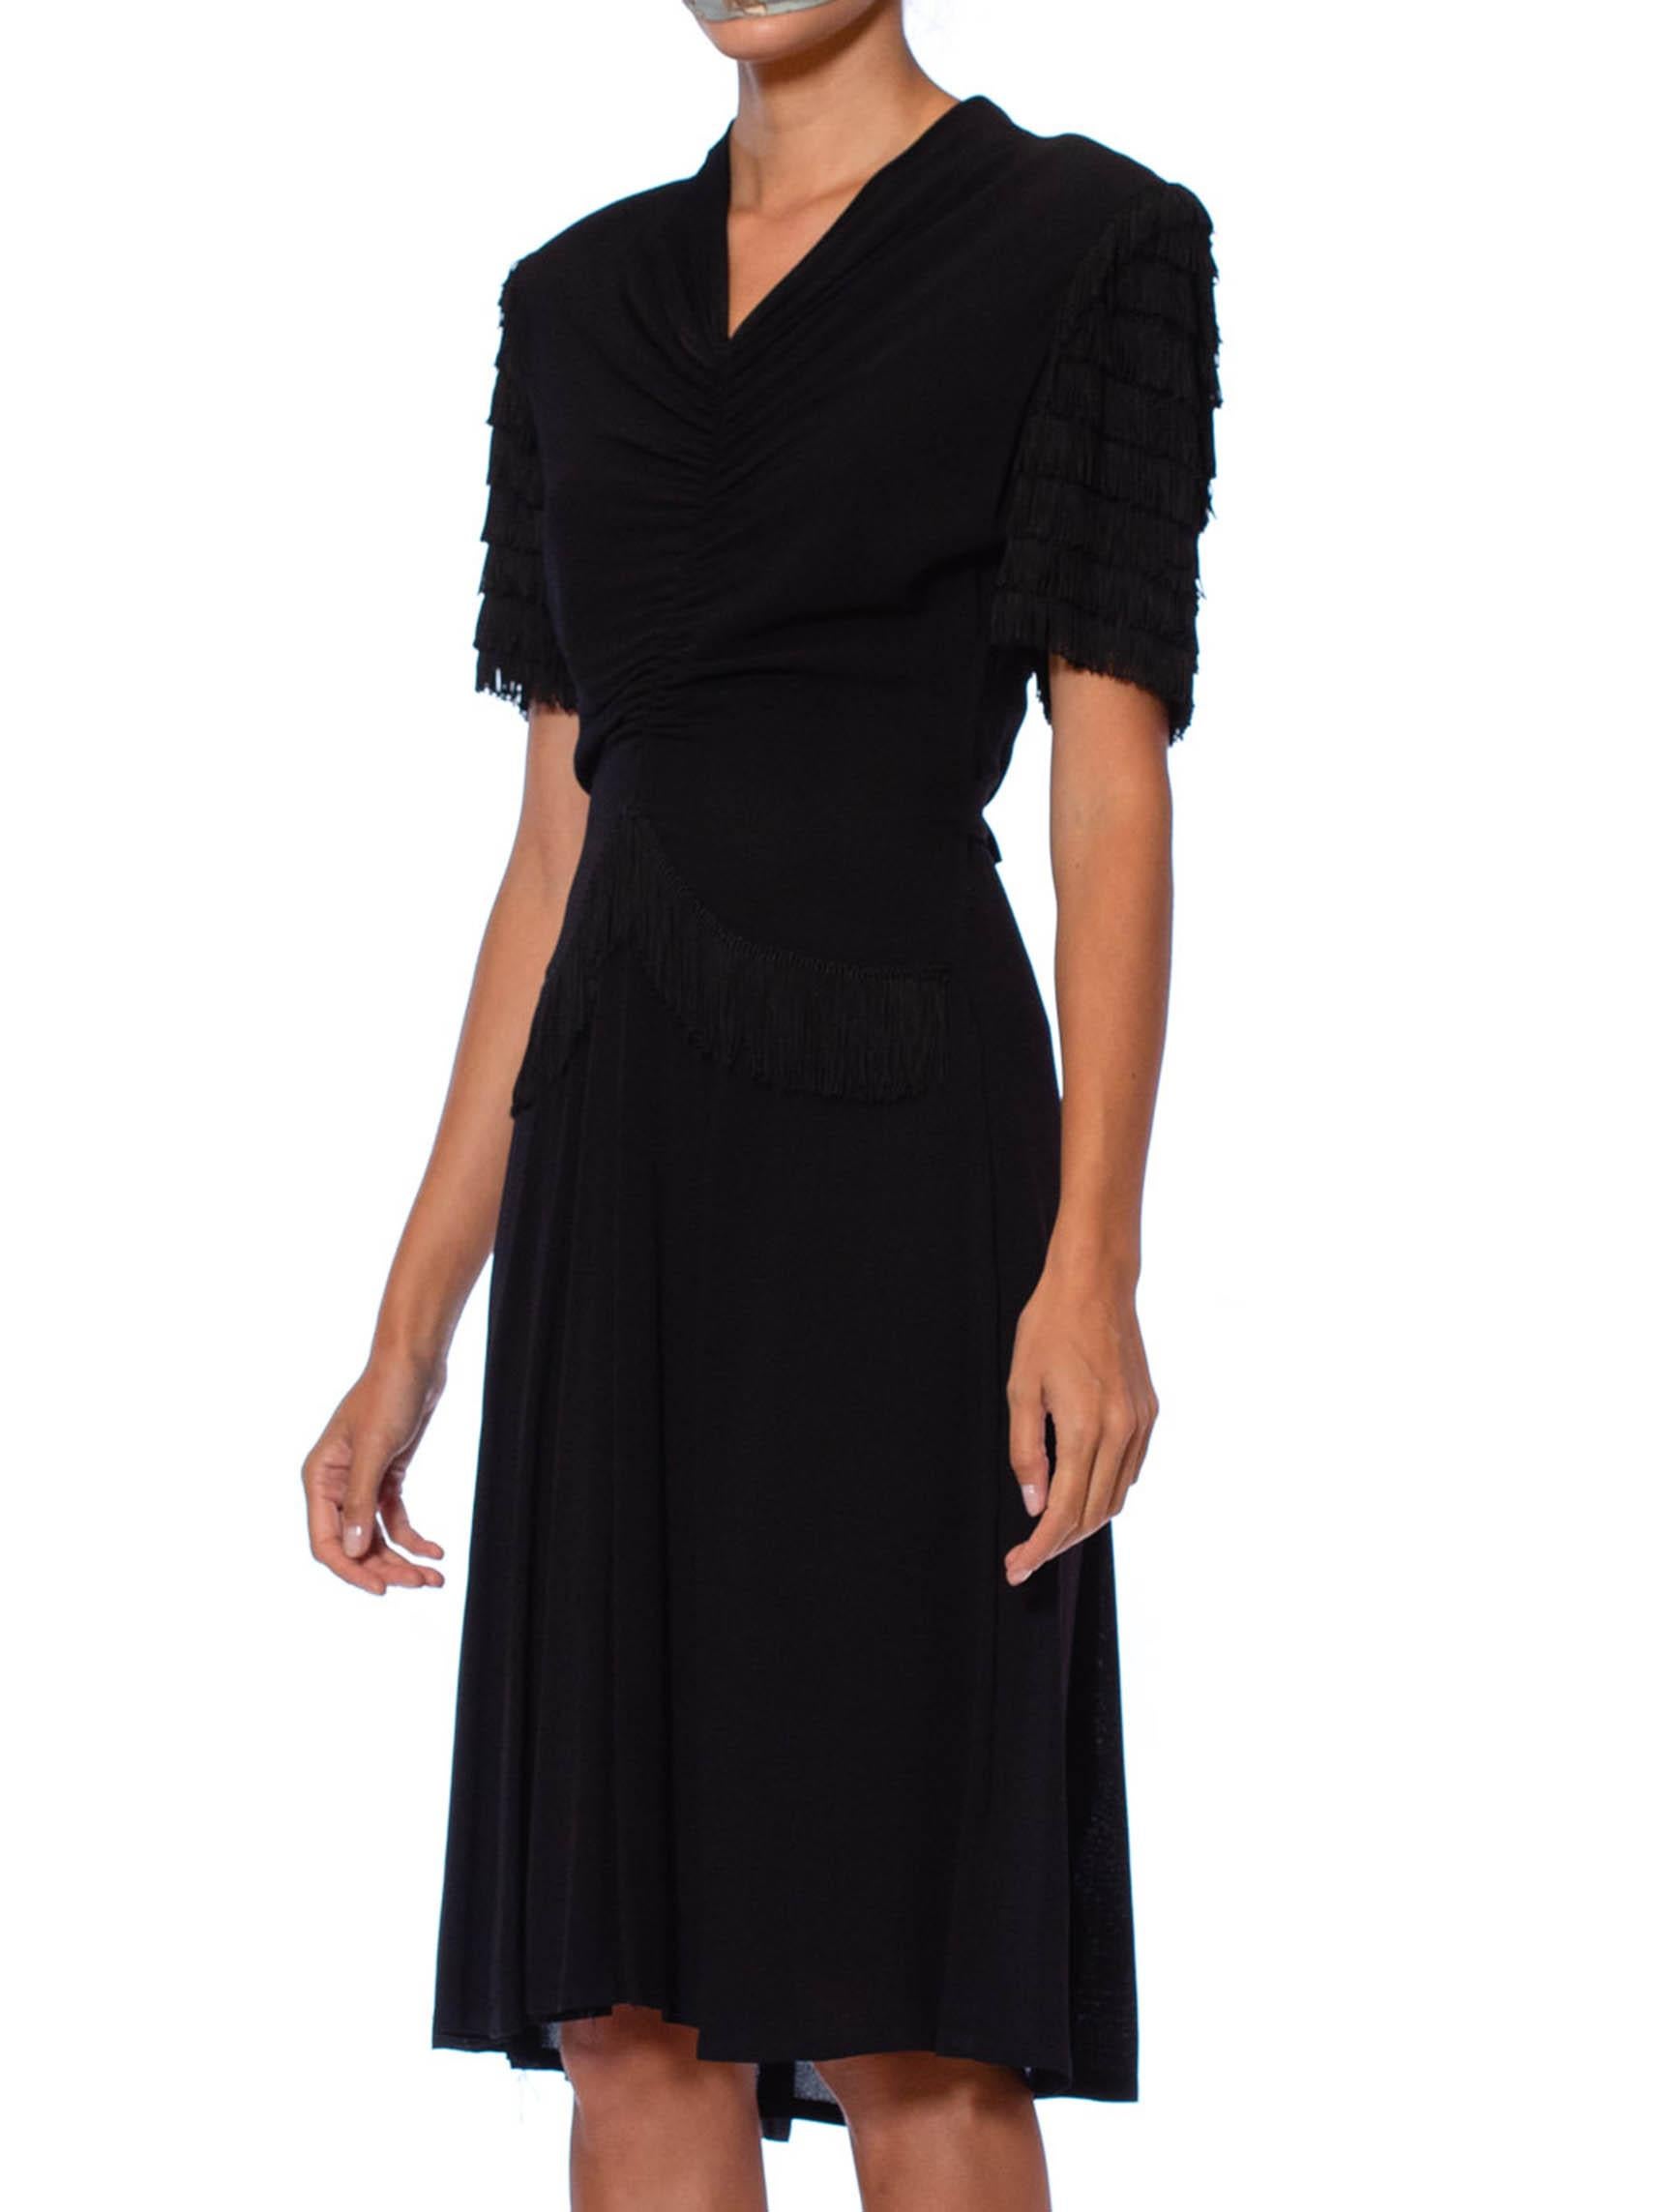 1940S Black Rayon Crepe Shirred Front Dress With Fringe Sleeves For Sale 2